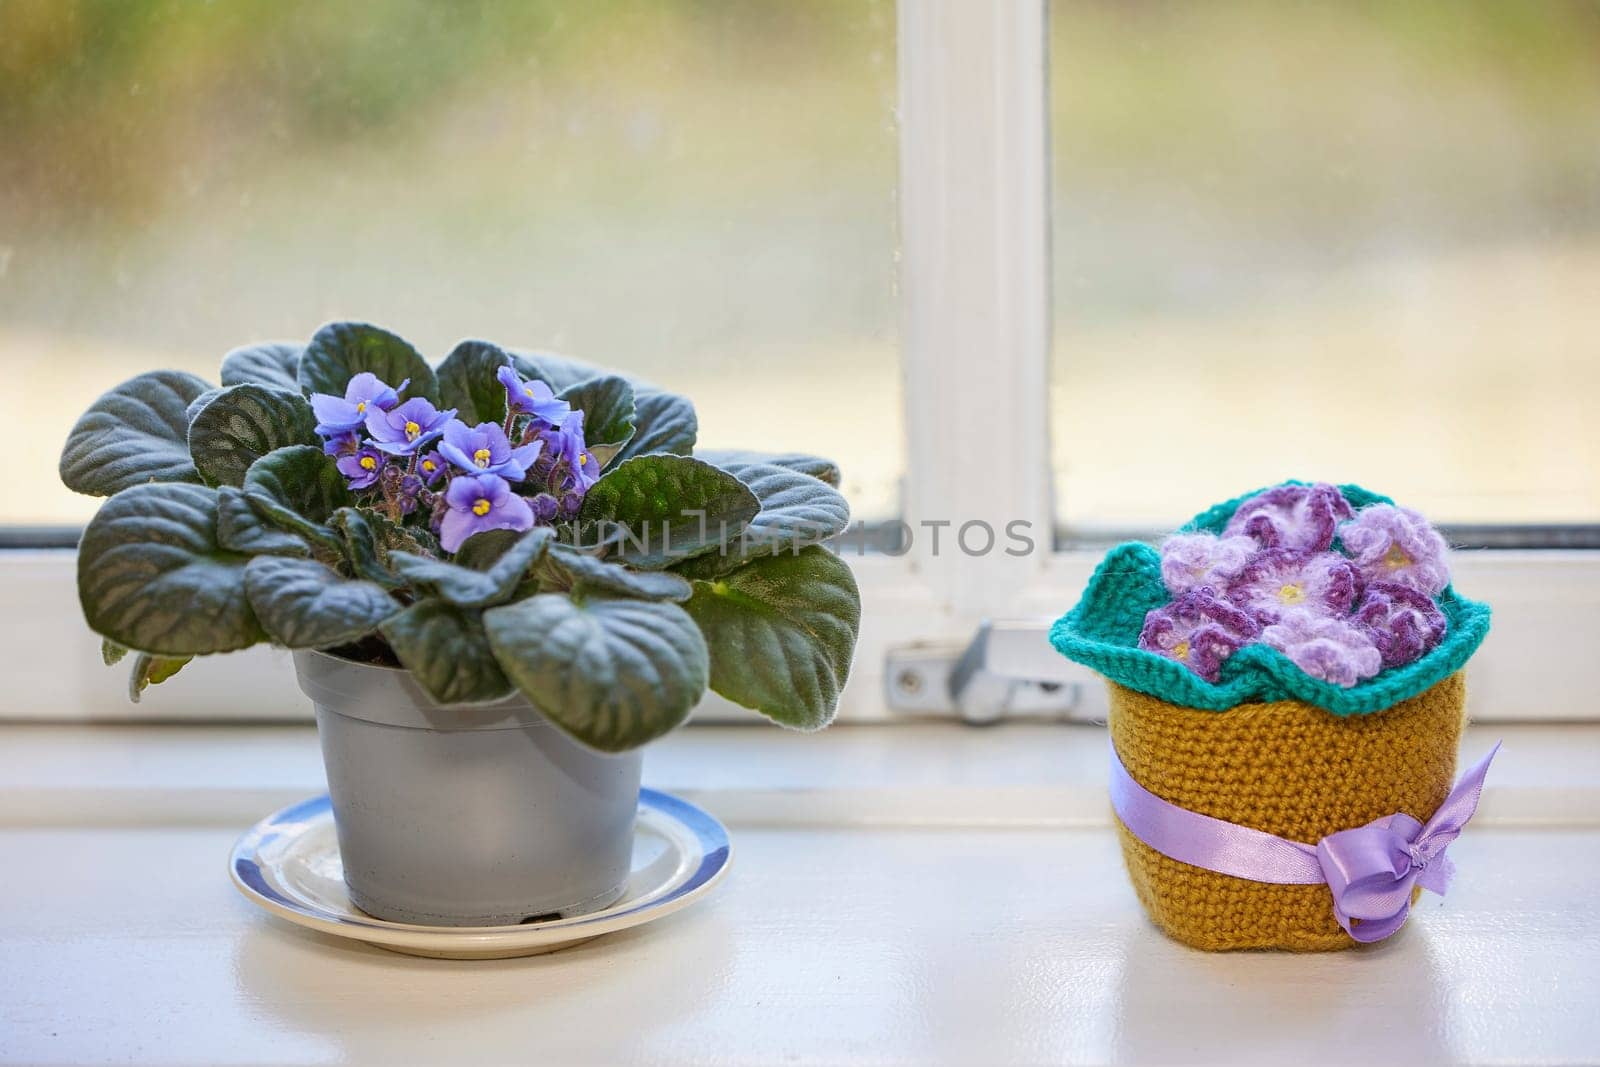 Cute knitted violet toy on the windowsill.